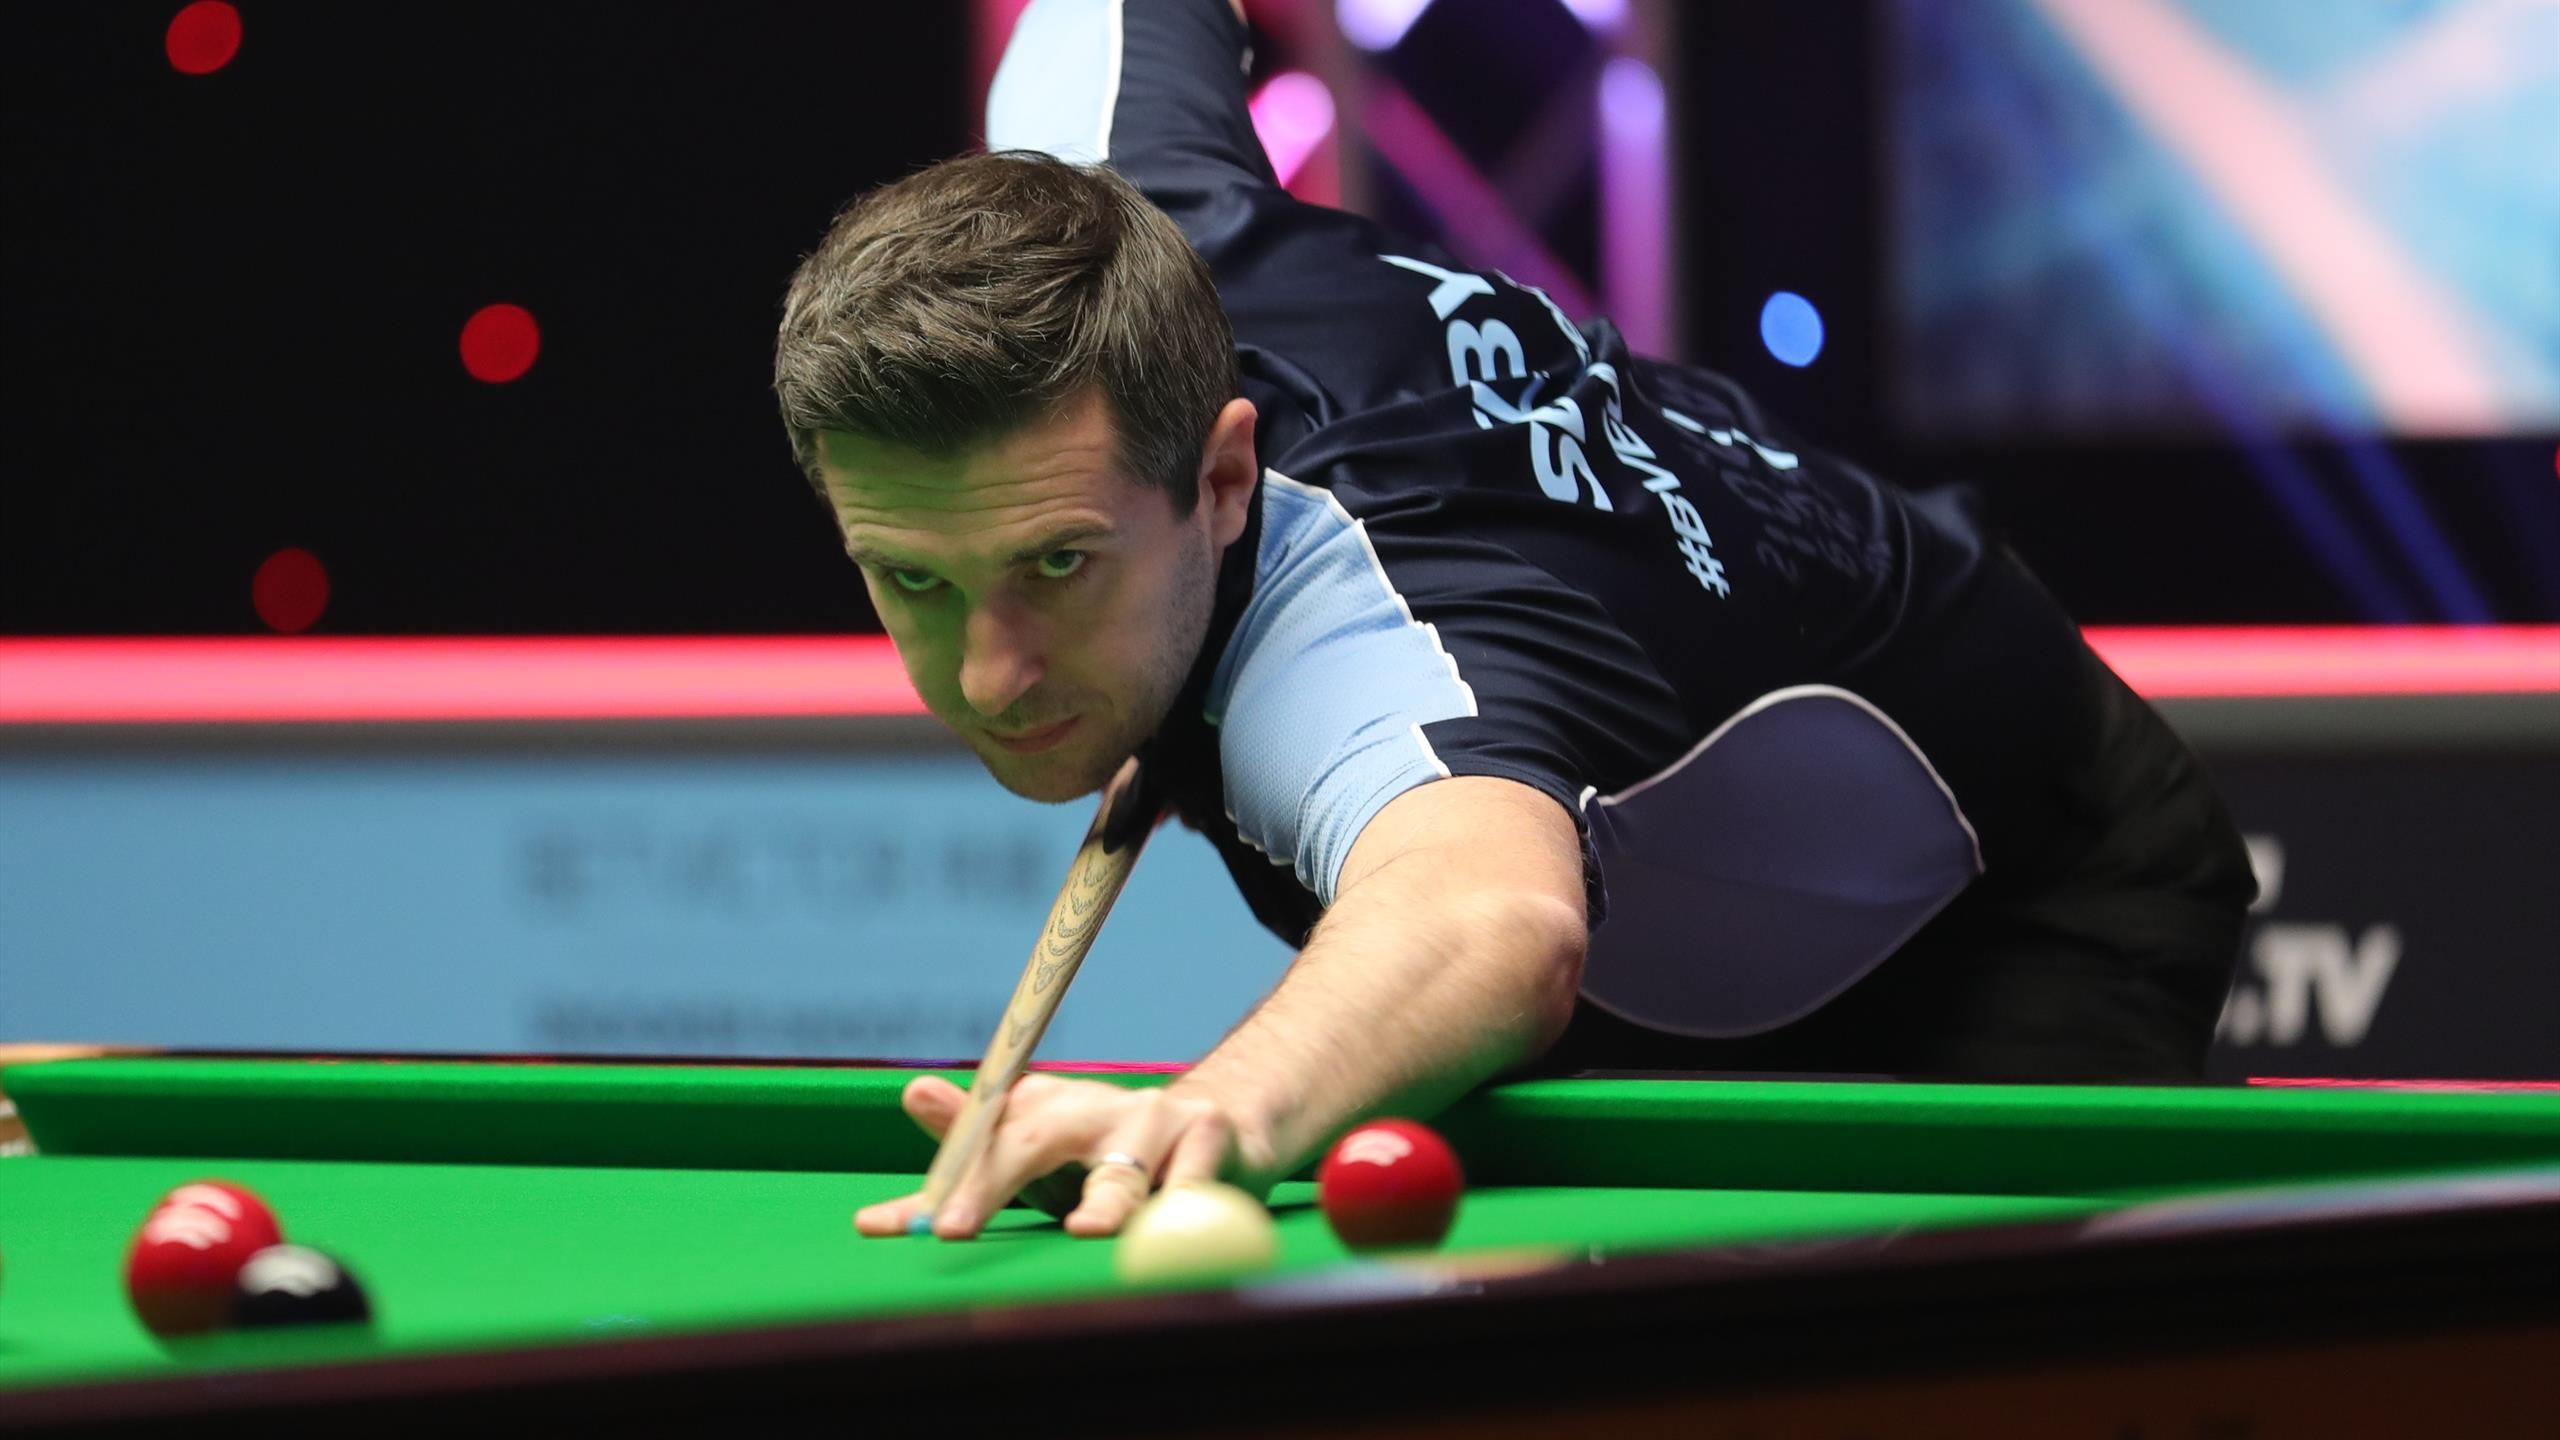 Snooker Shoot Out 2021 LIVE updates - Ryan Day fights back to beat Mark Selby in final